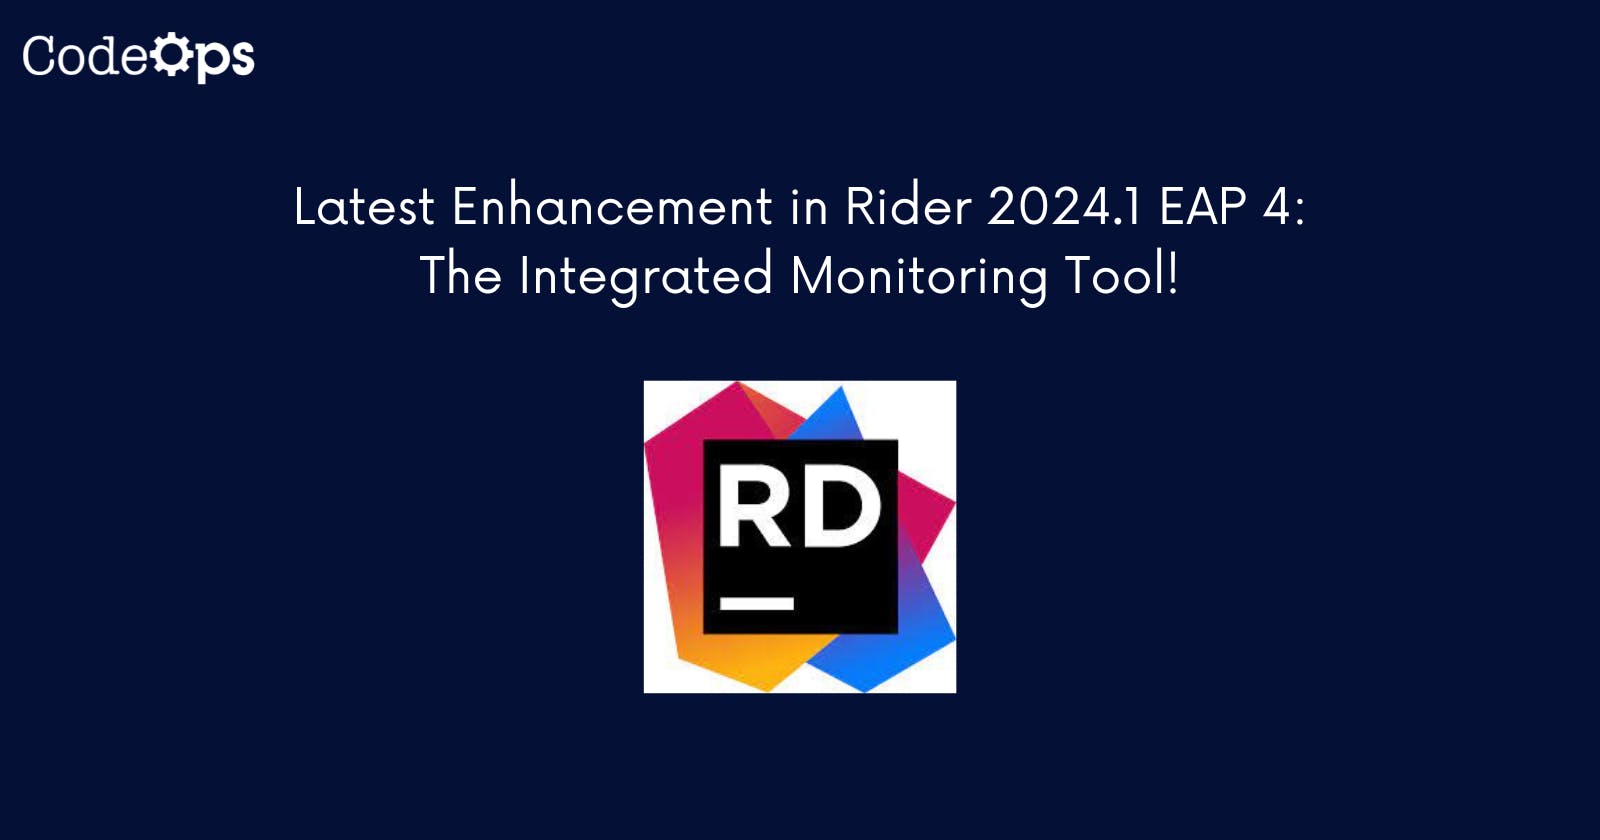 Introducing the Latest Enhancement in Rider 2024.1 EAP 4: The Integrated Monitoring Tool!